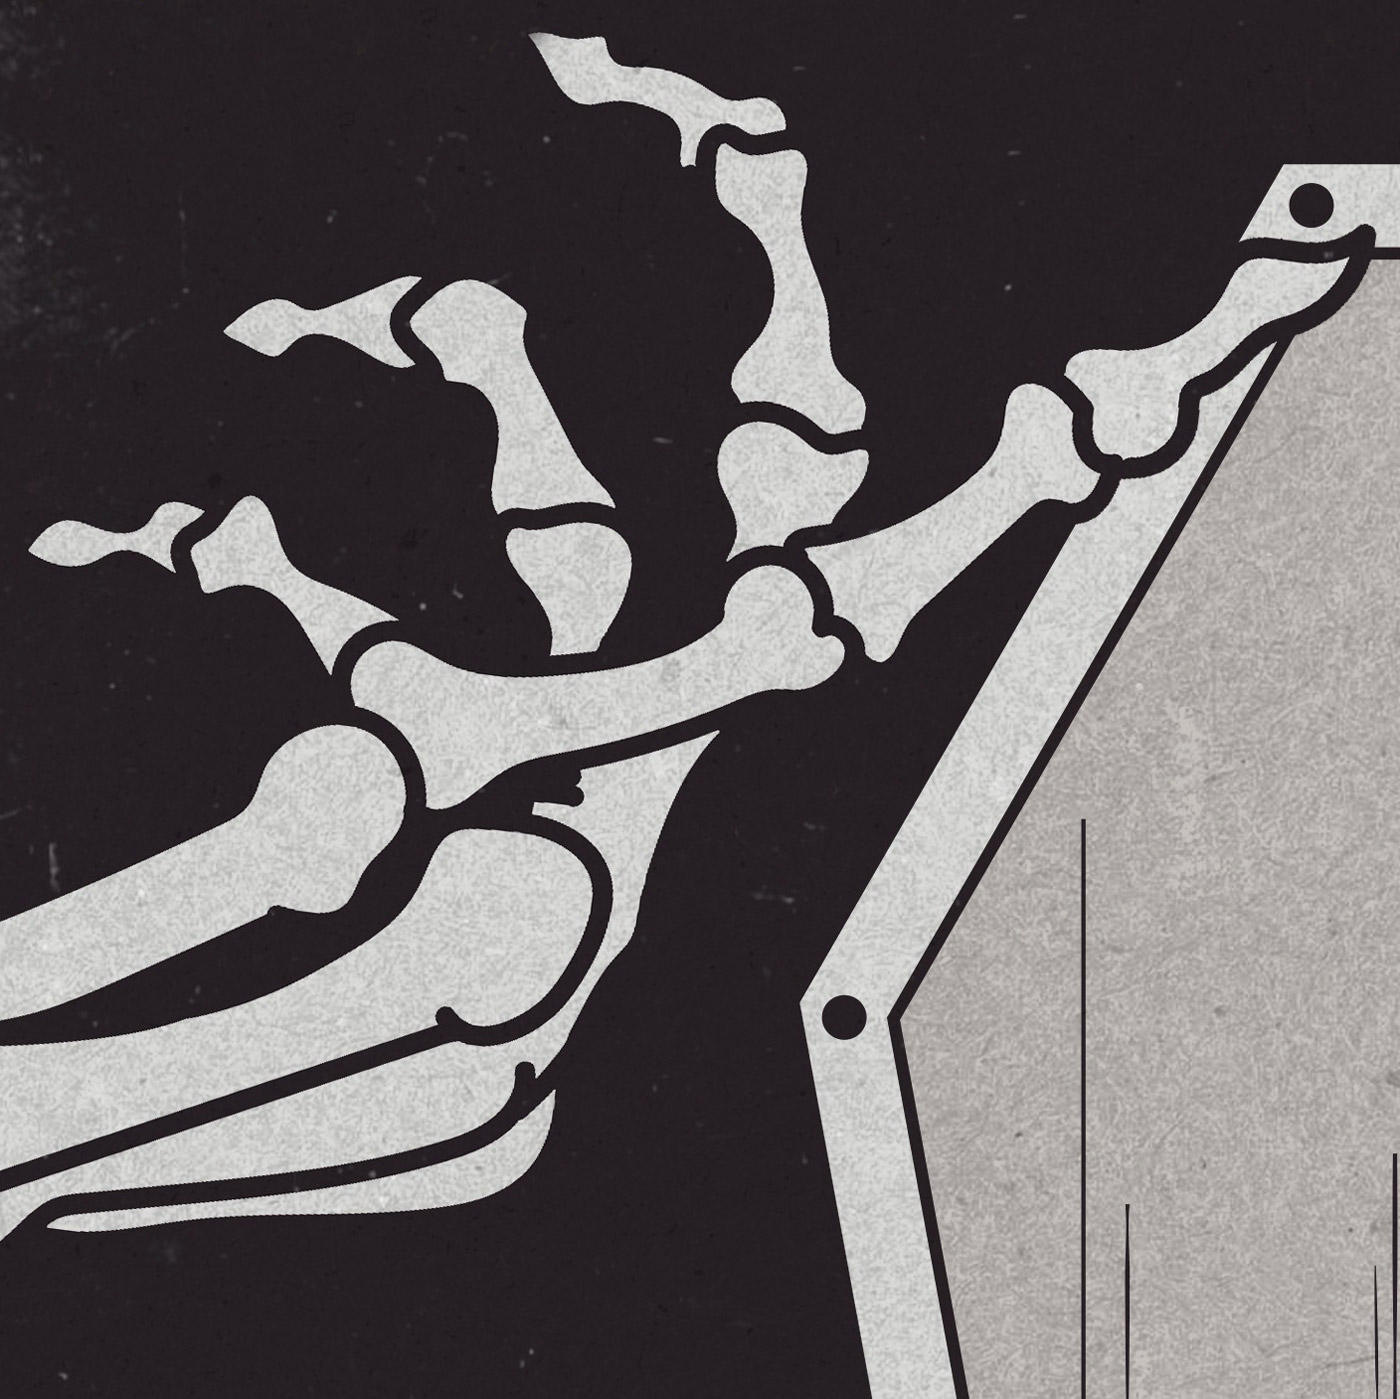 gray and black illustration of a skeleton hand pointing toward the edge of a coffin